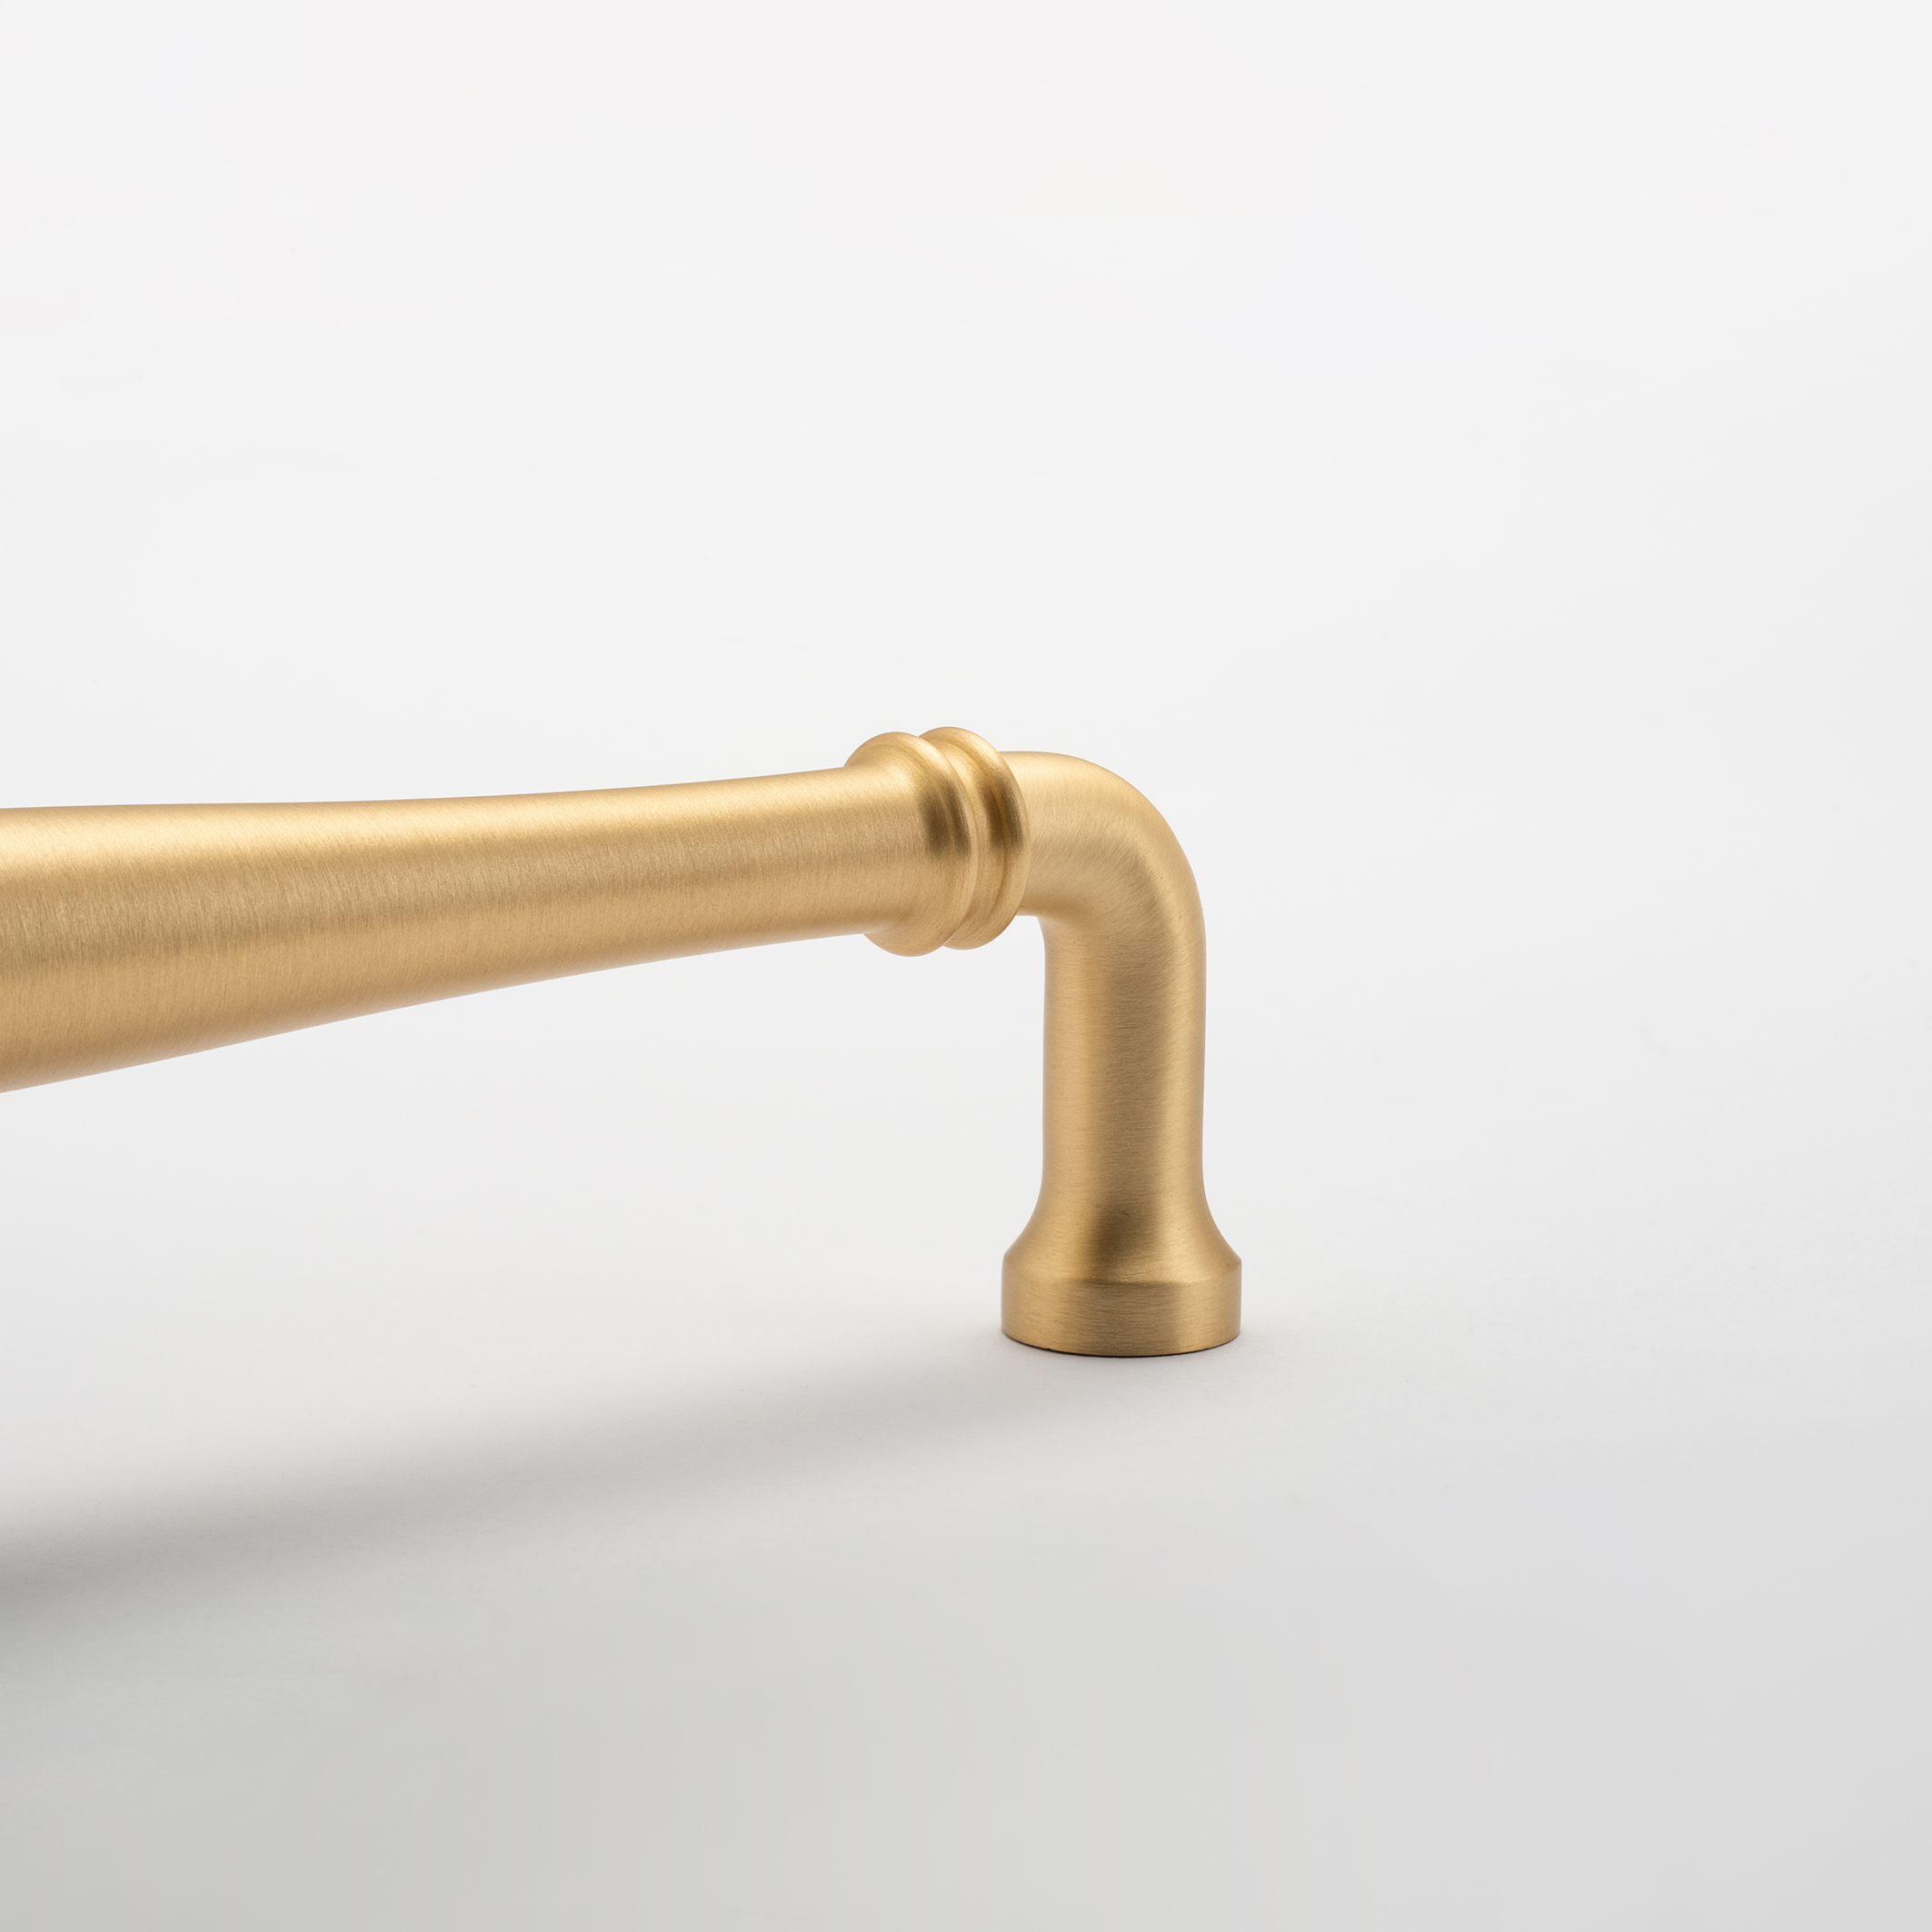 21066B - Sarlat Cabinet Pull with Backplate - CTC128mm - Brushed Brass